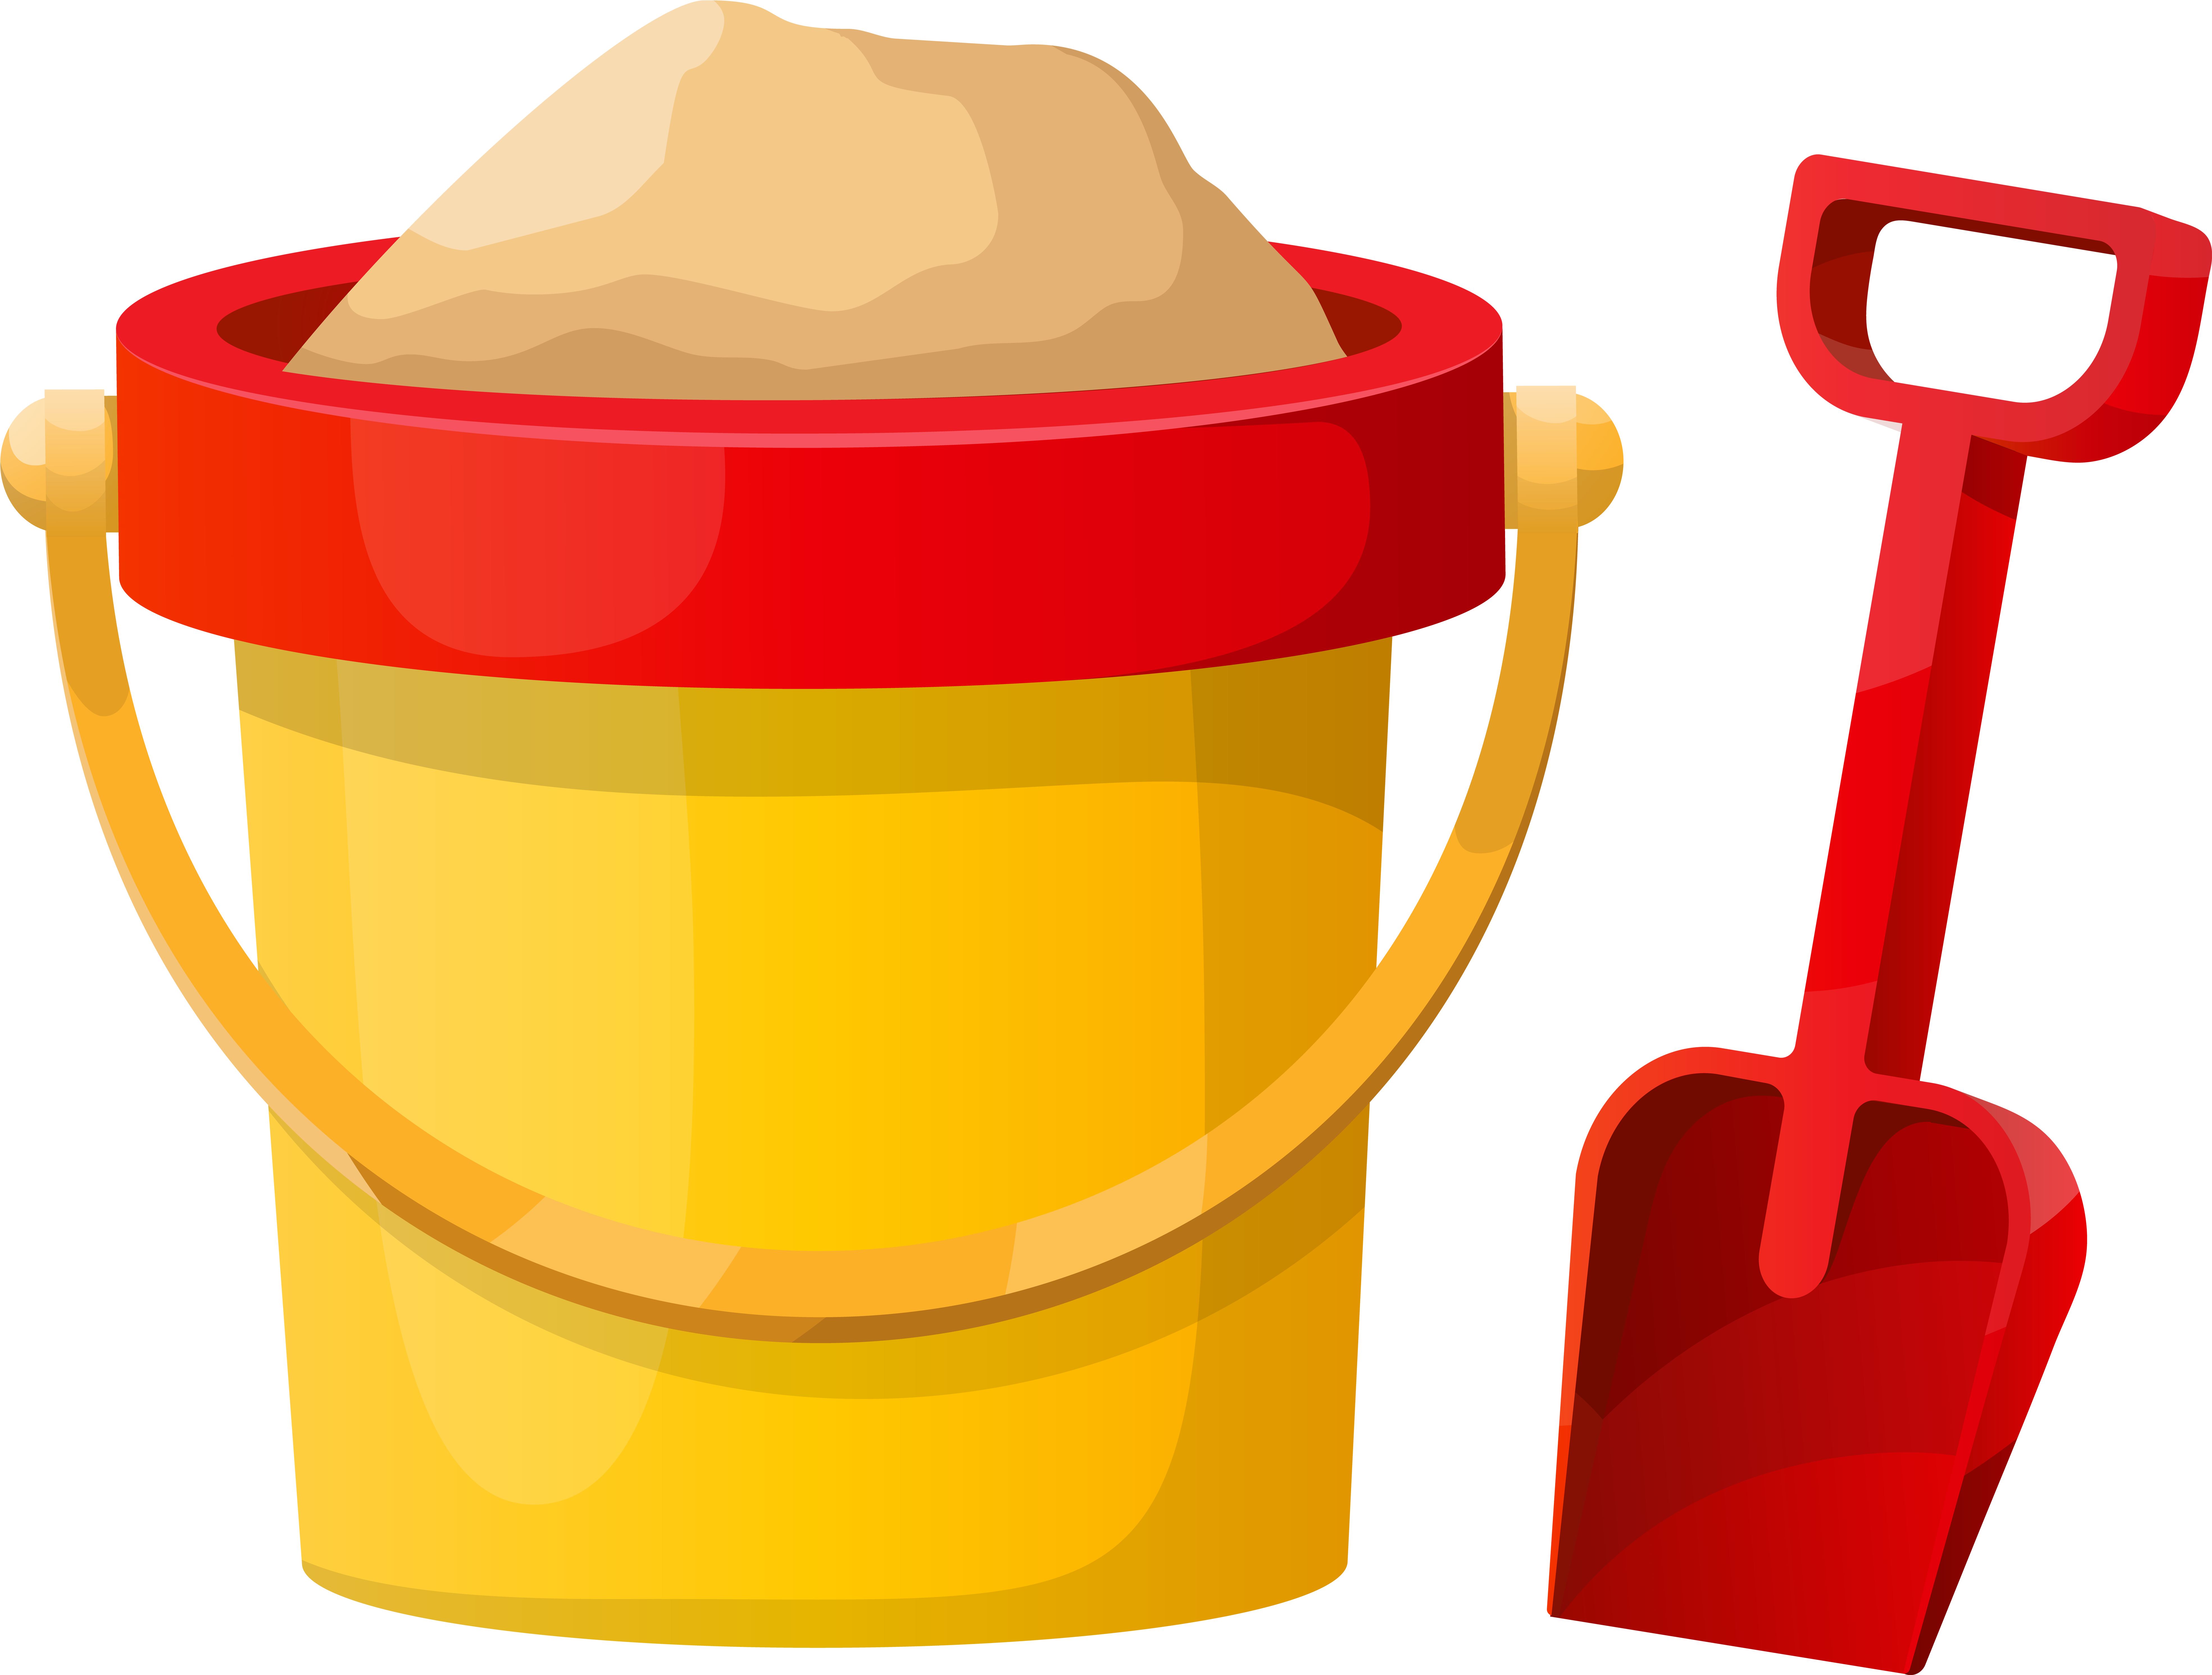 A Bucket And Shovel With Sand